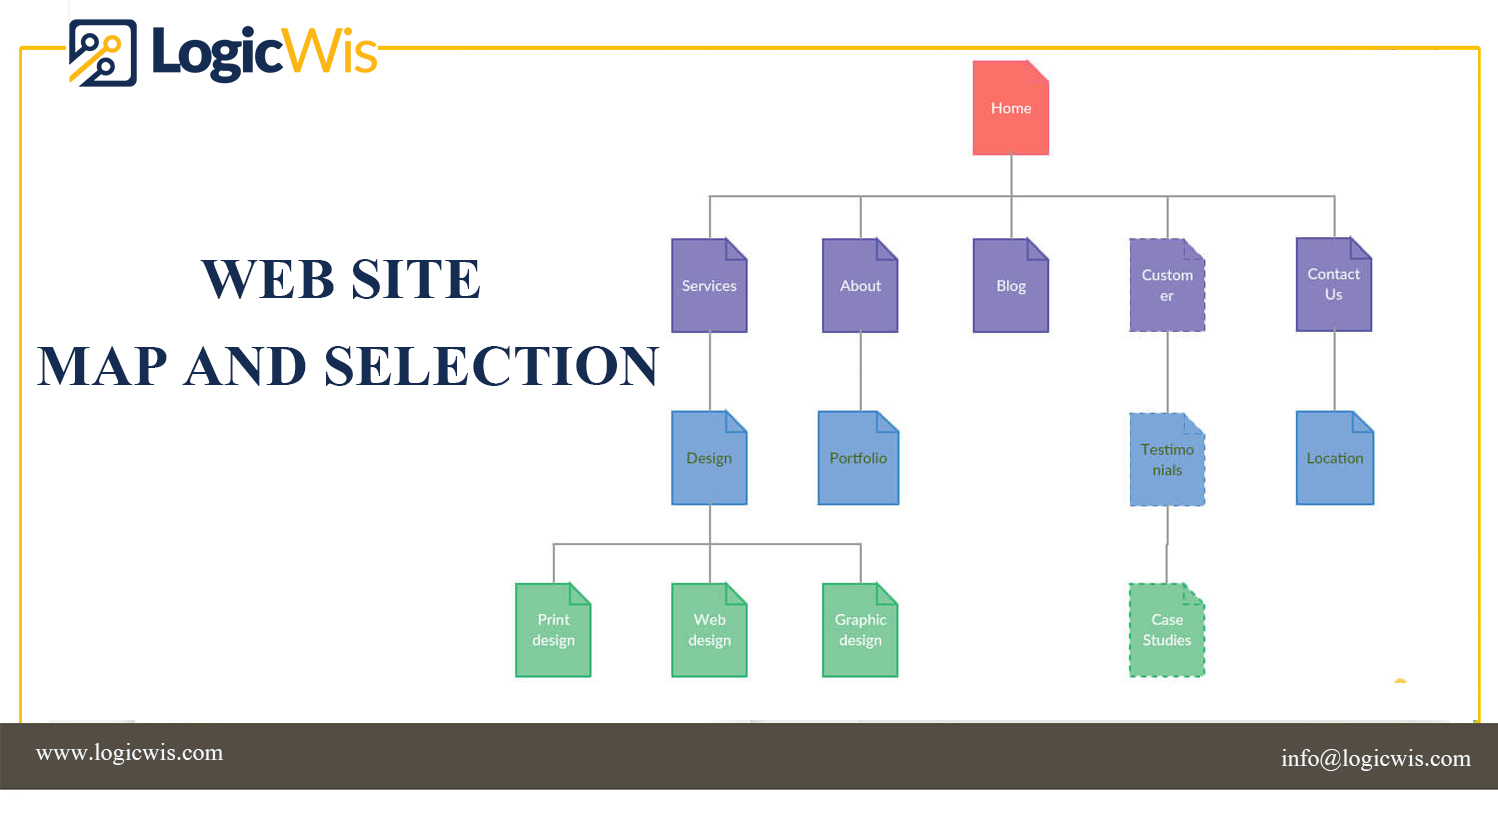 Web Site Map and Selection